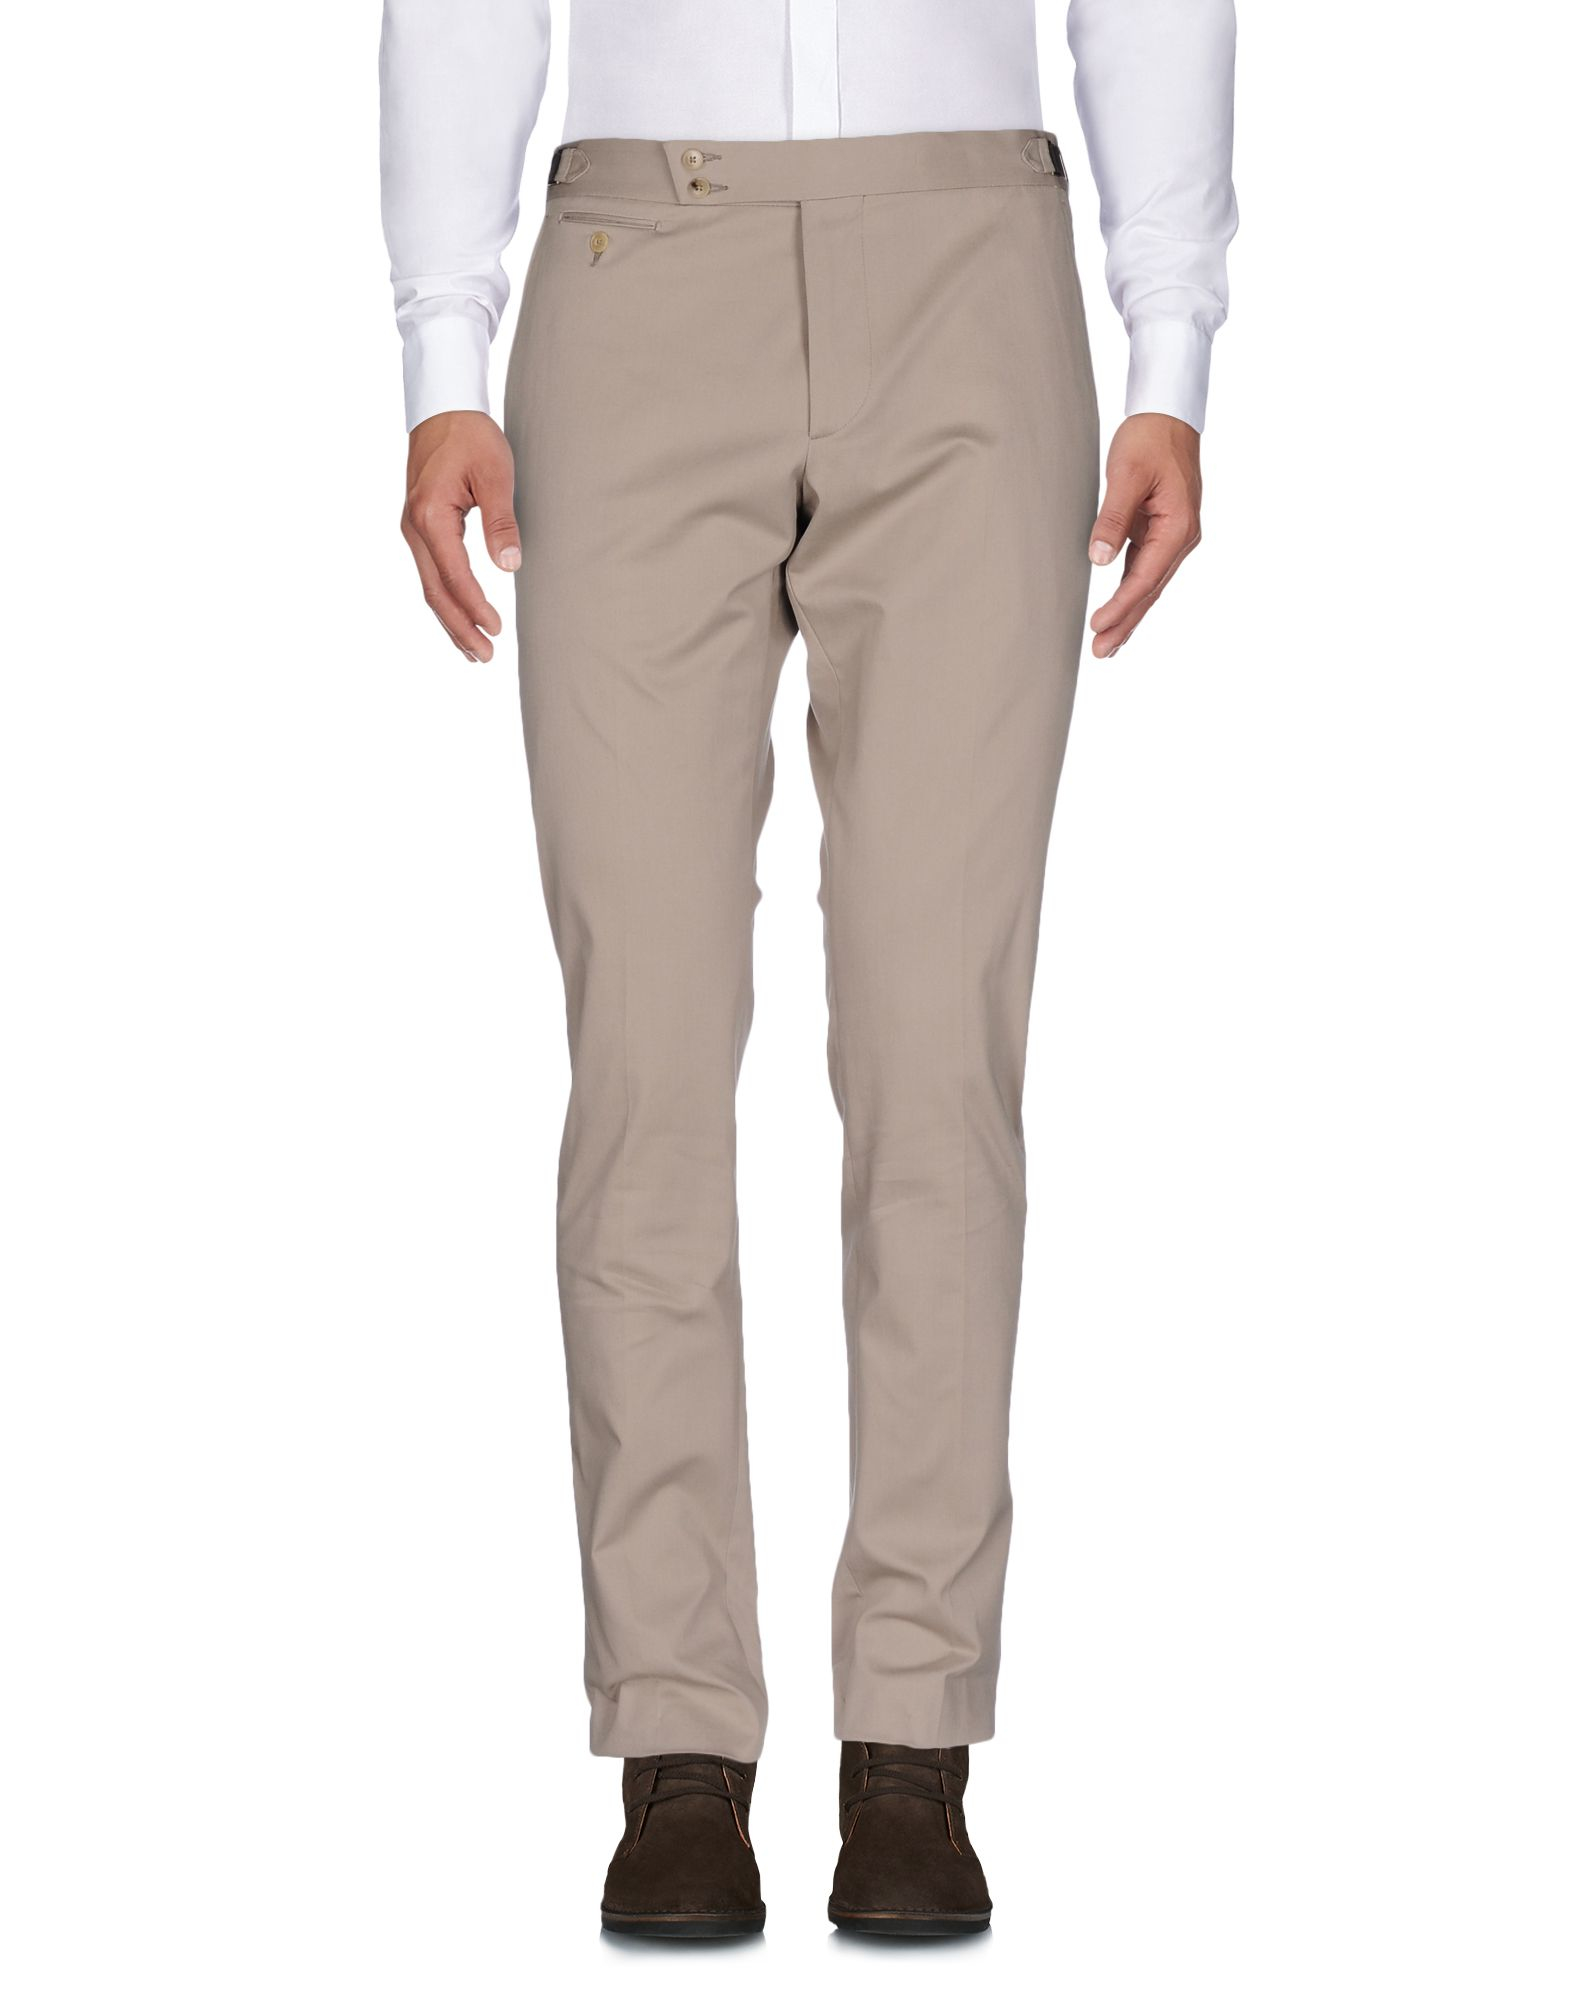 Gucci Cotton Casual Pants in Beige (Natural) for Men - Lyst